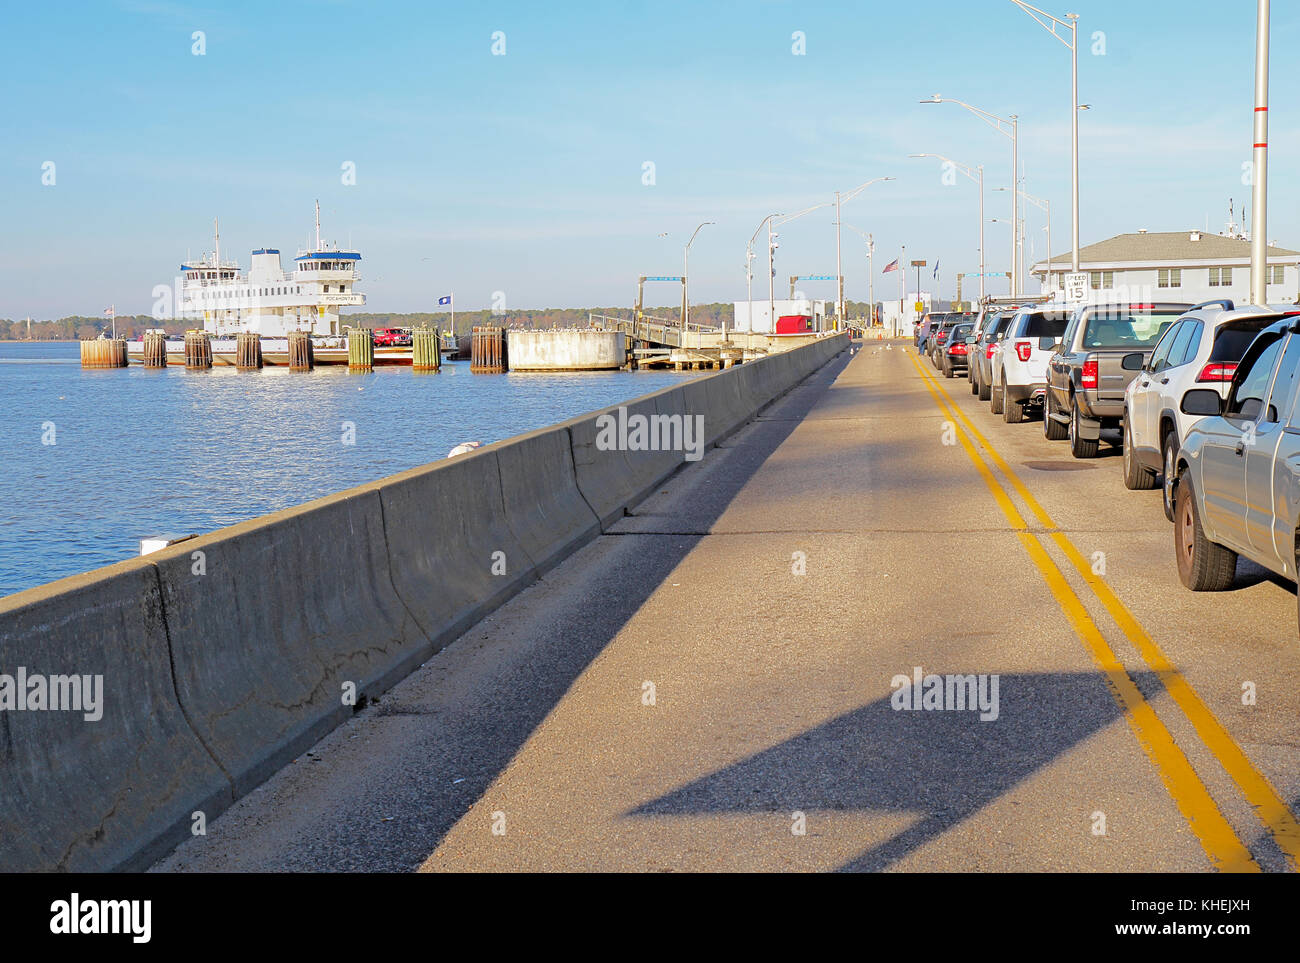 SCOTLAND, VIRGINIA - FEBRUARY 20 2017: Cars waiting in line for the Jamestown-Scotland Ferry between Jamestown Island and Surrey in Virginia. This his Stock Photo